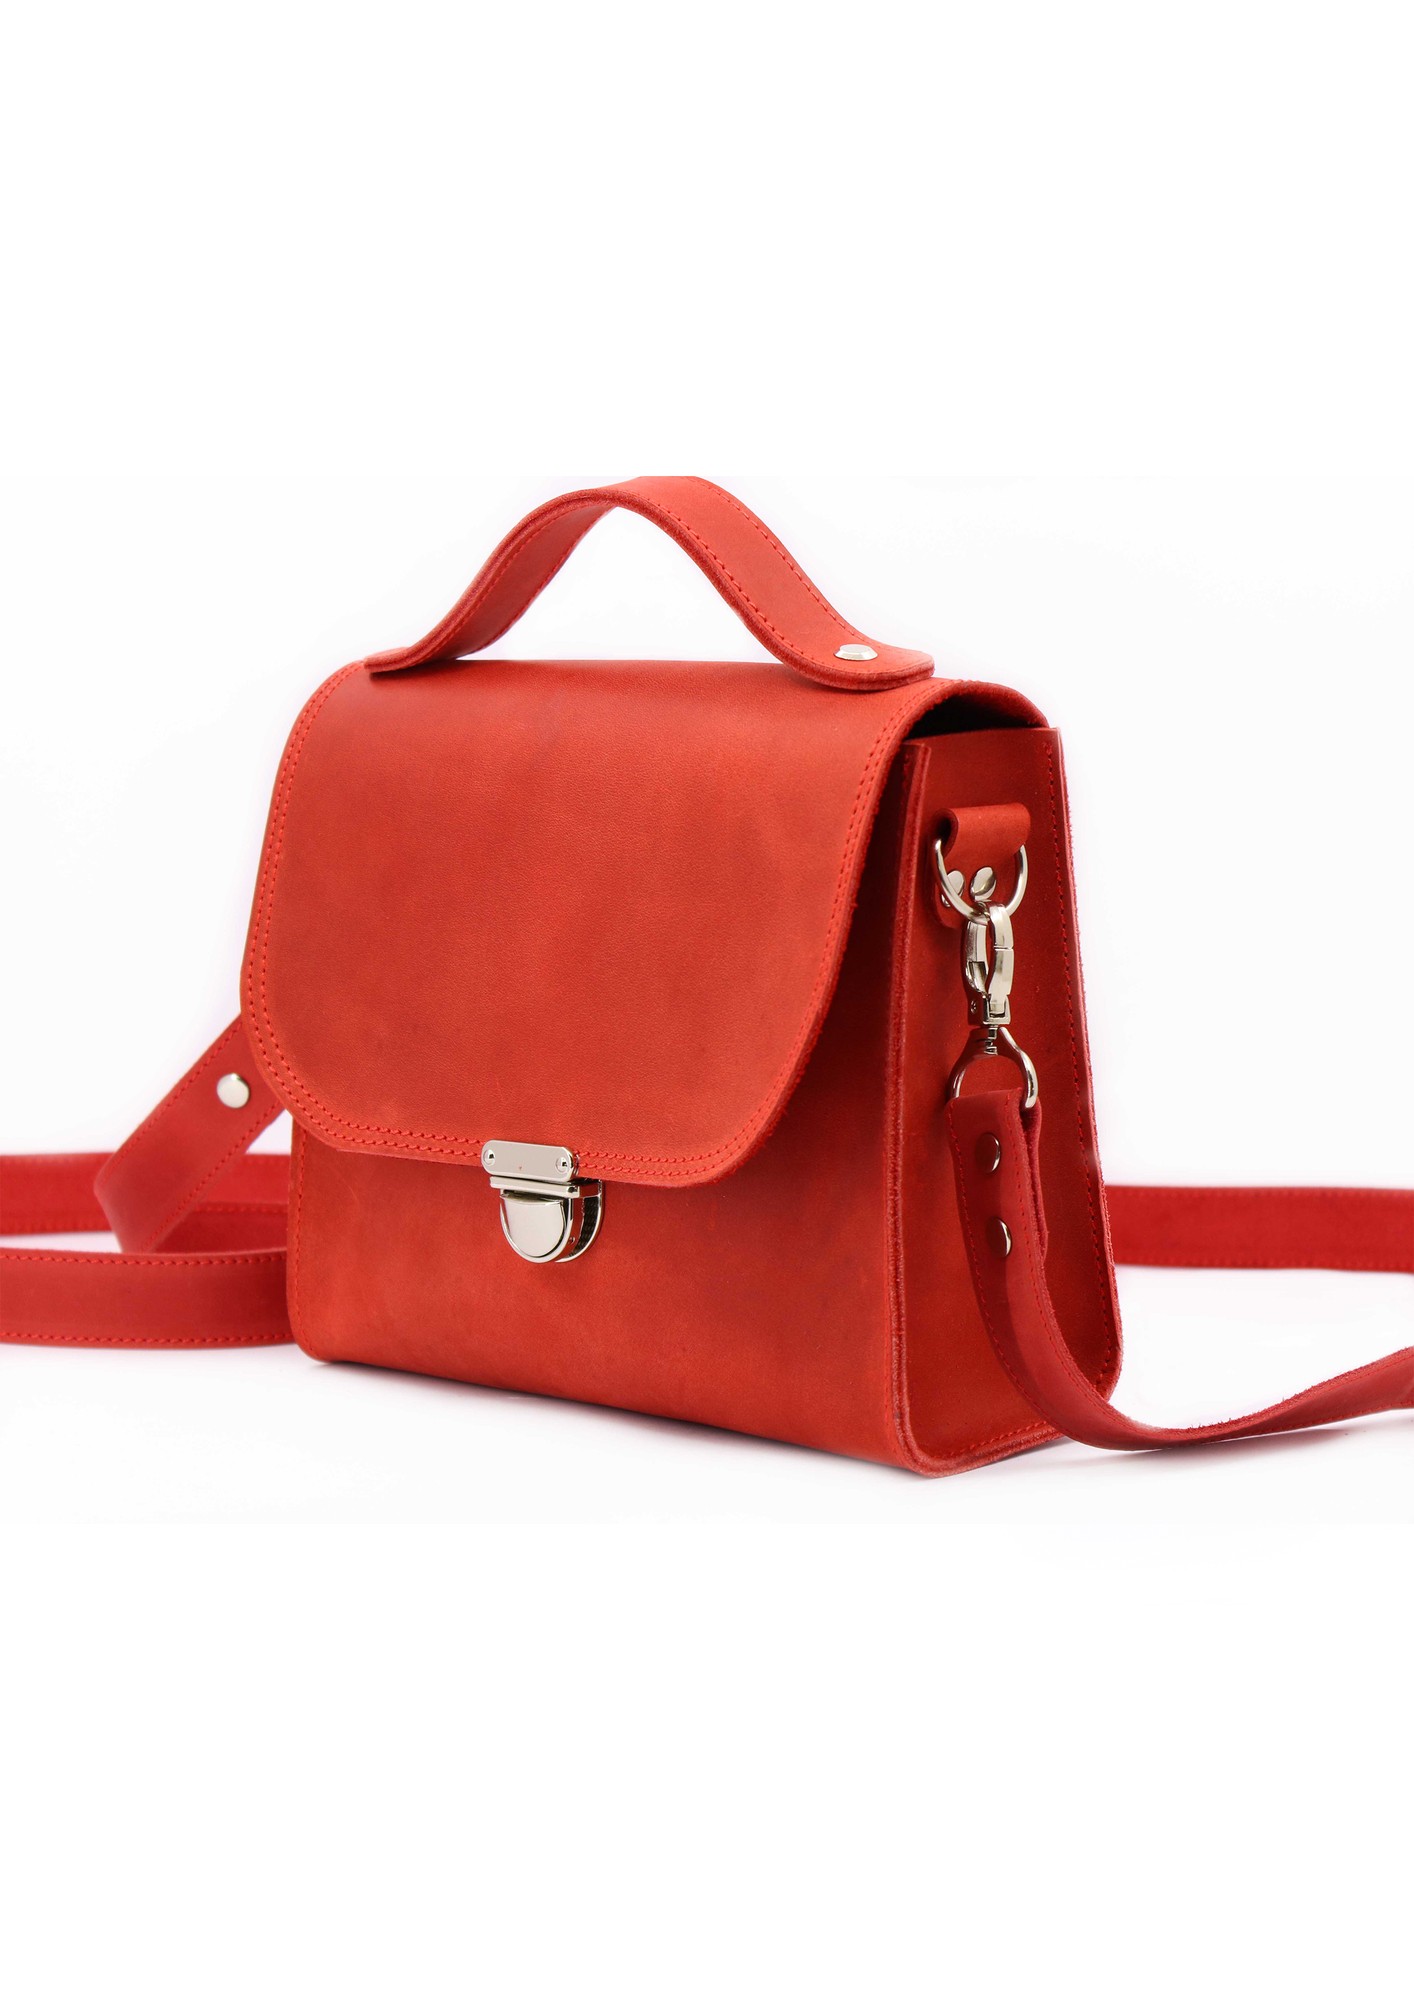 Womens leather shoulder bag with top handle on strap / Red - 01034